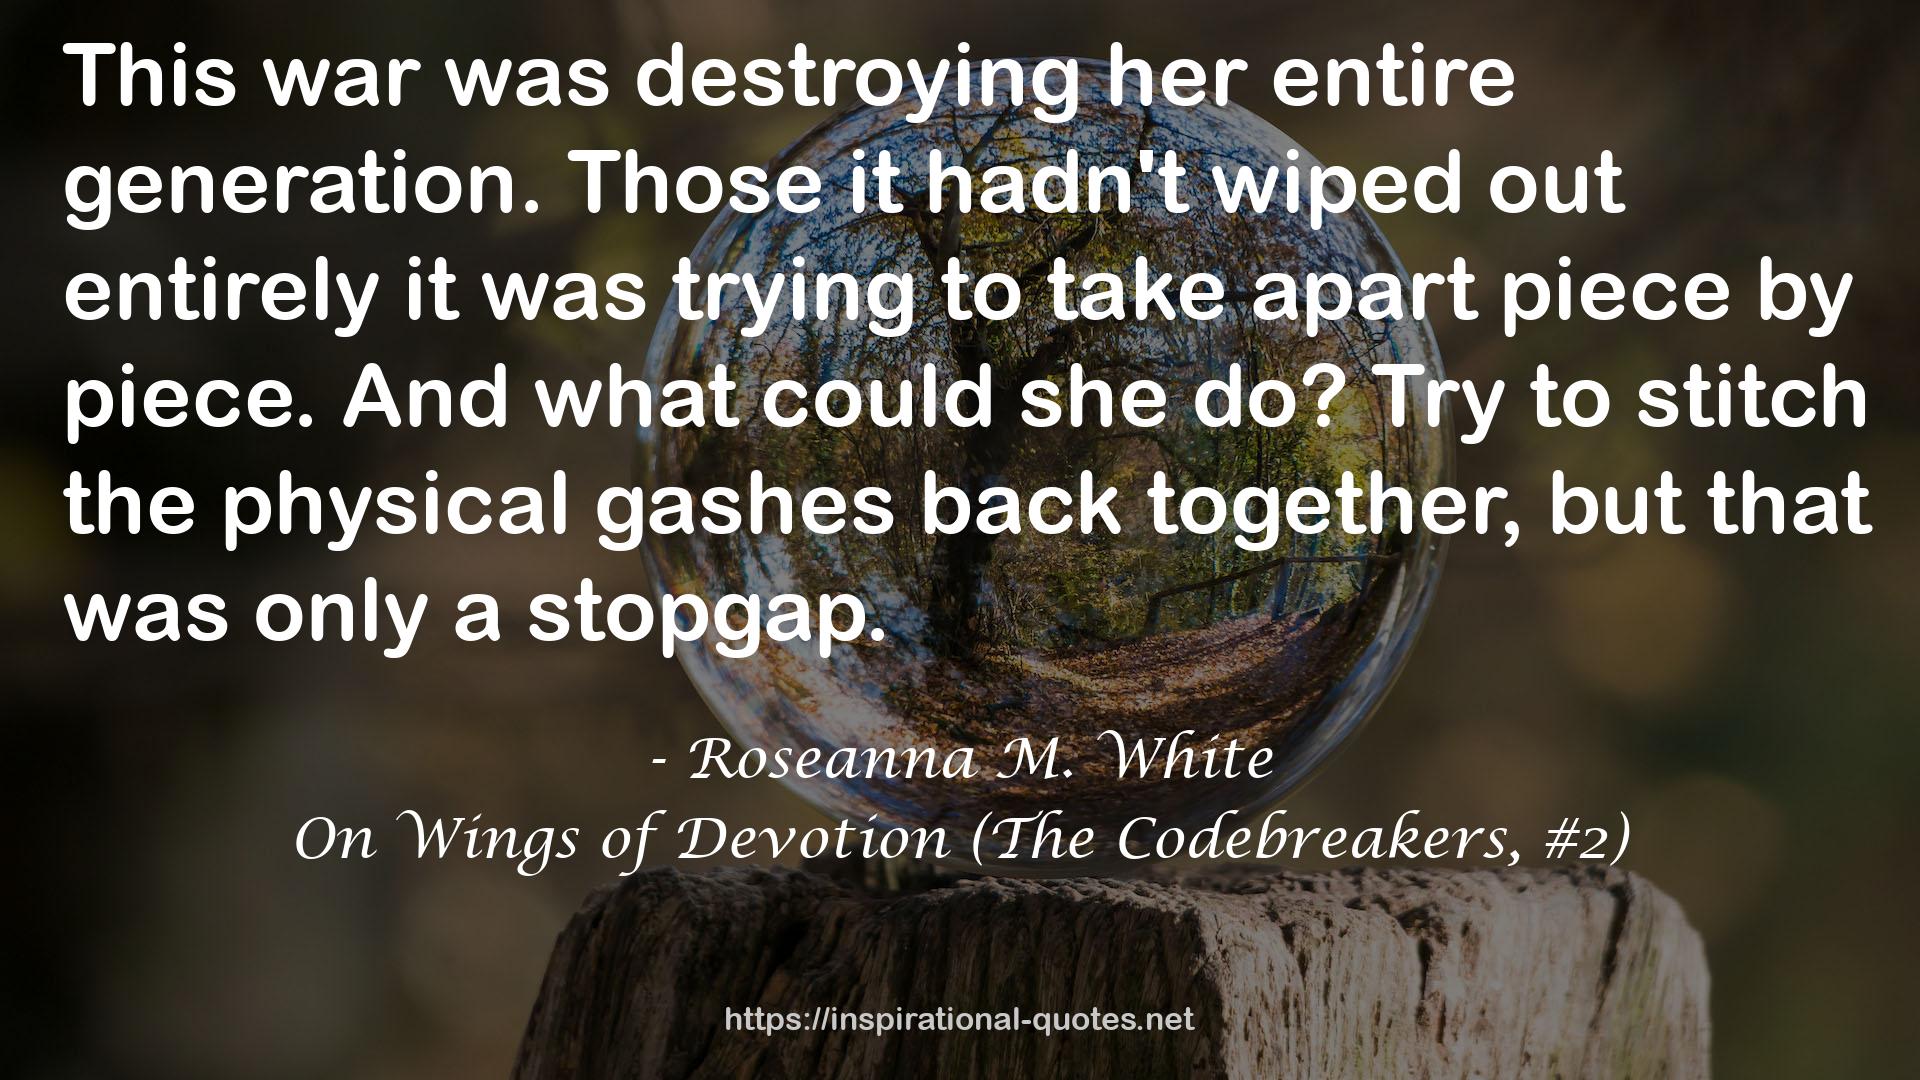 On Wings of Devotion (The Codebreakers, #2) QUOTES